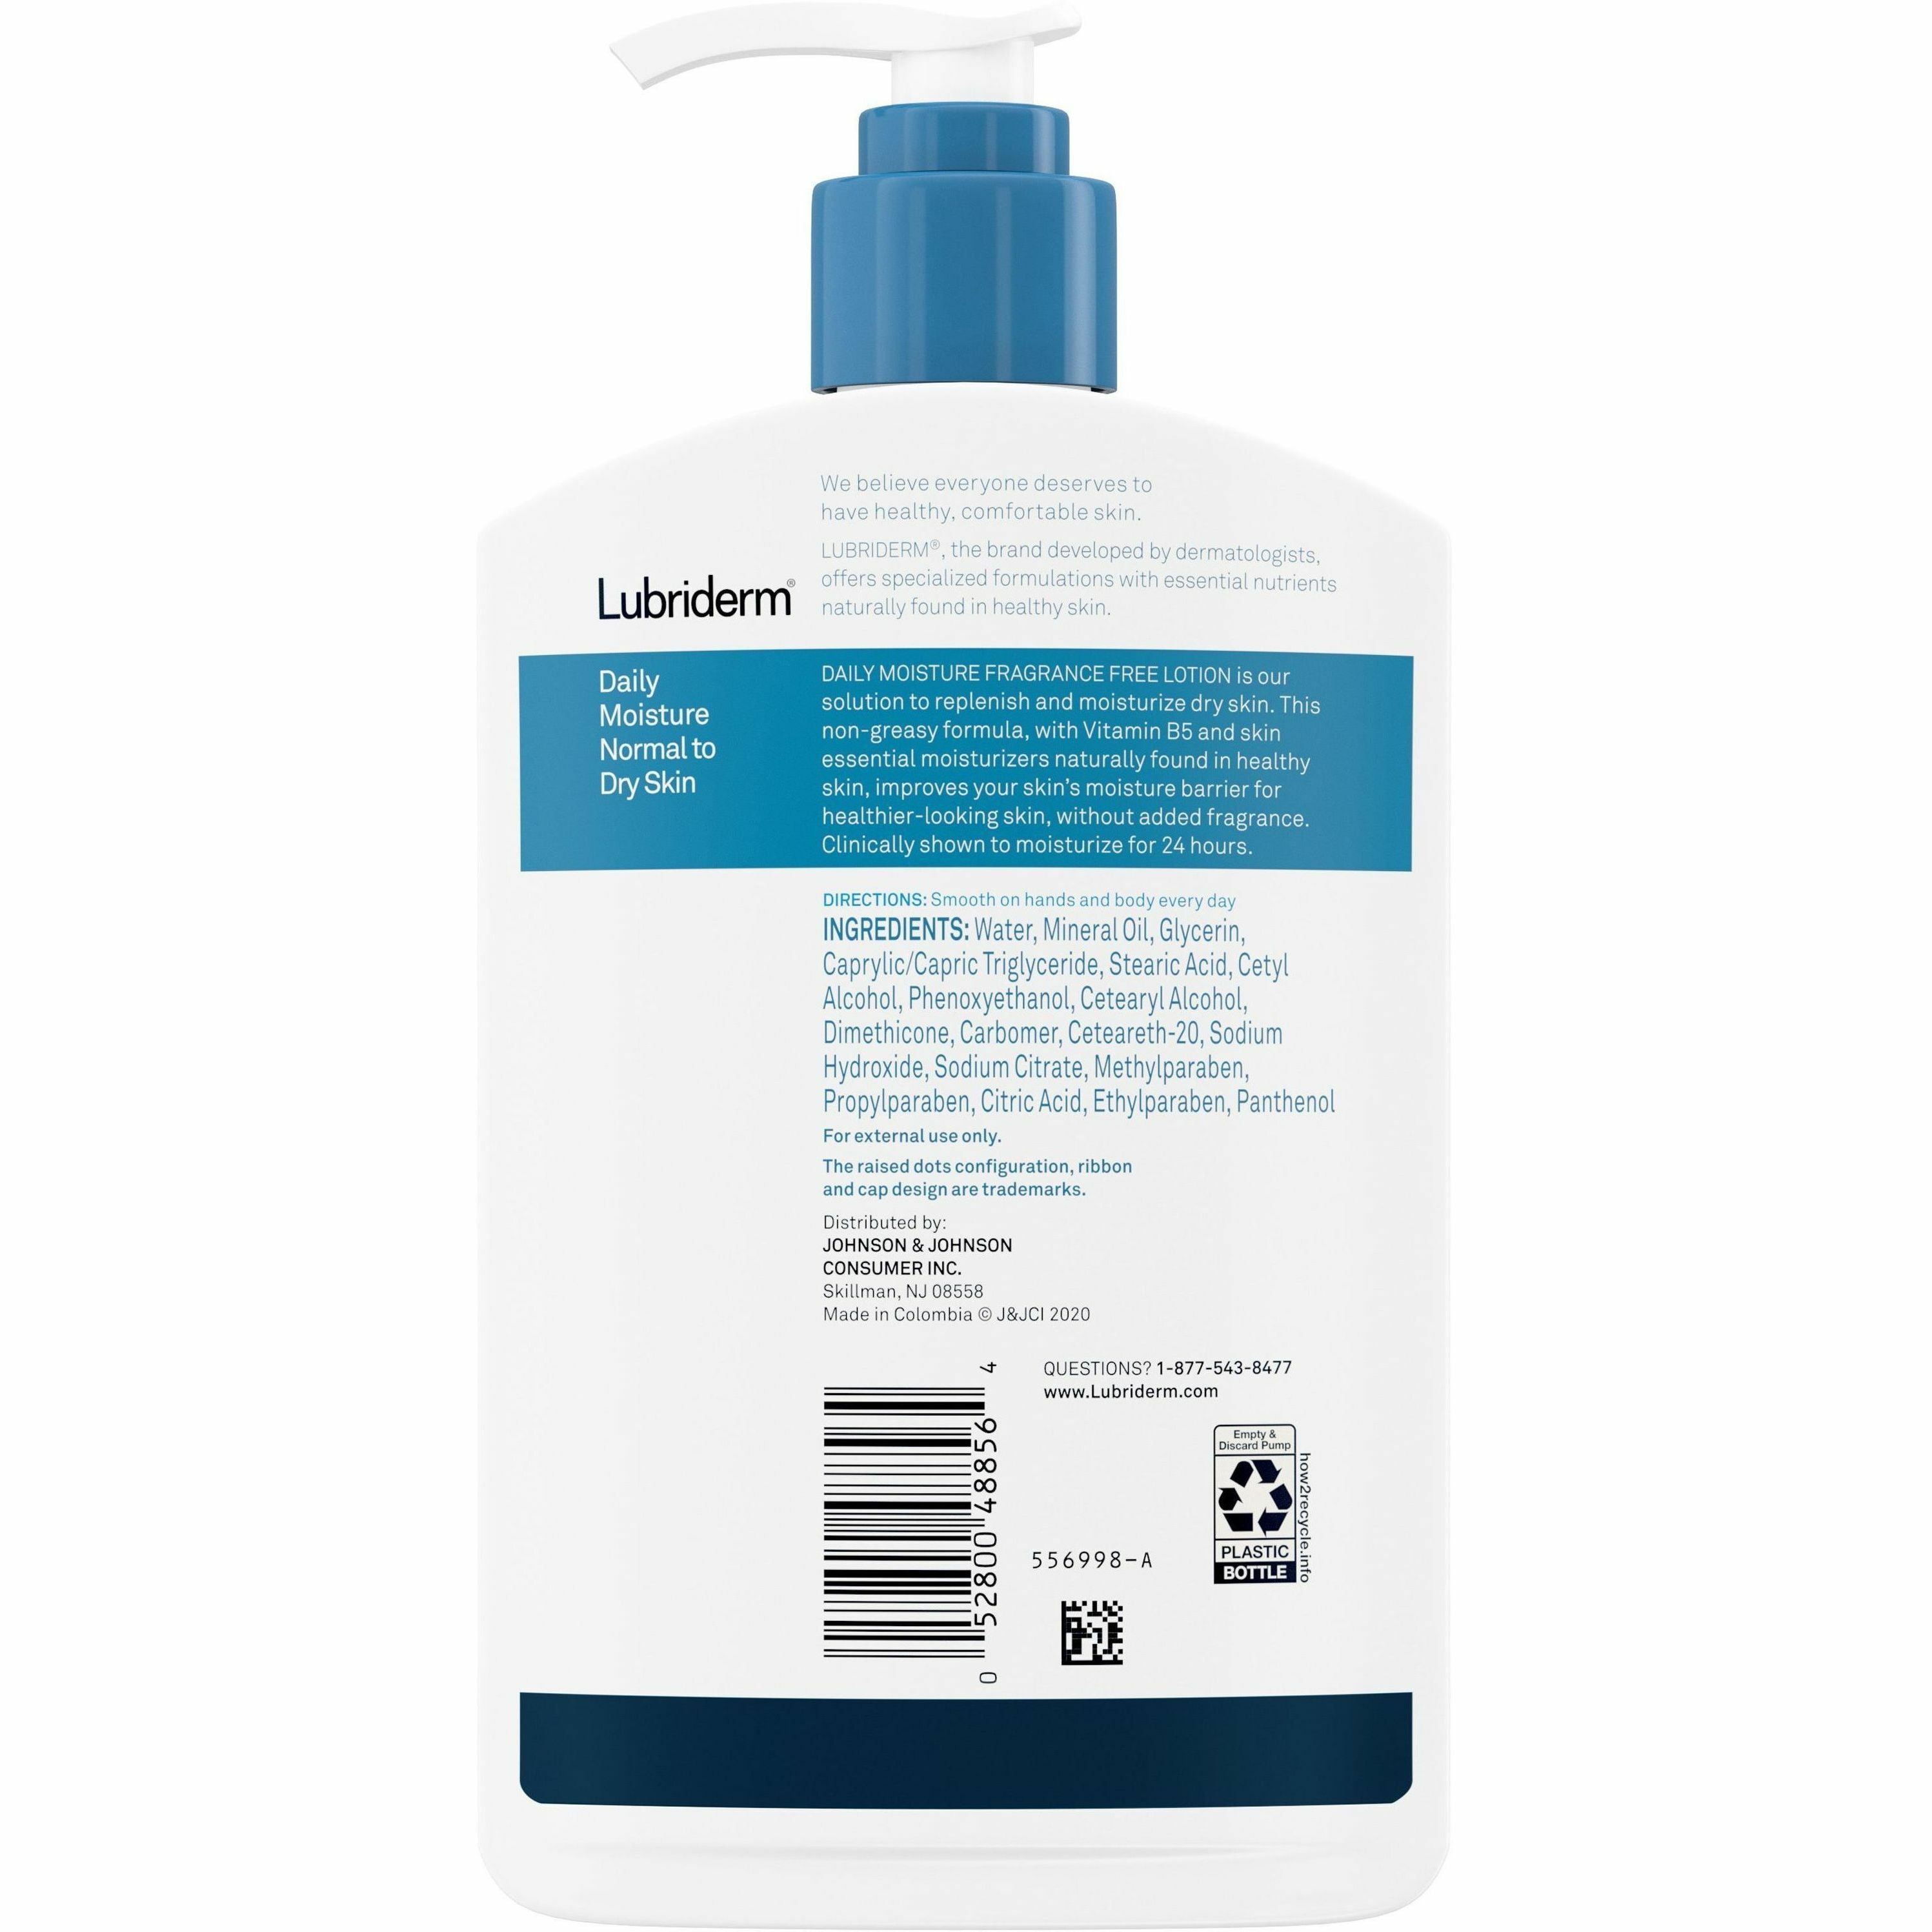 lubriderm-daily-moisture-lotion-lotion-16-fl-oz-for-dry-normal-skin-applicable-on-body-moisturising-non-greasy-fragrance-free-absorbs-quickly-12-carton_joj48323ct - 4